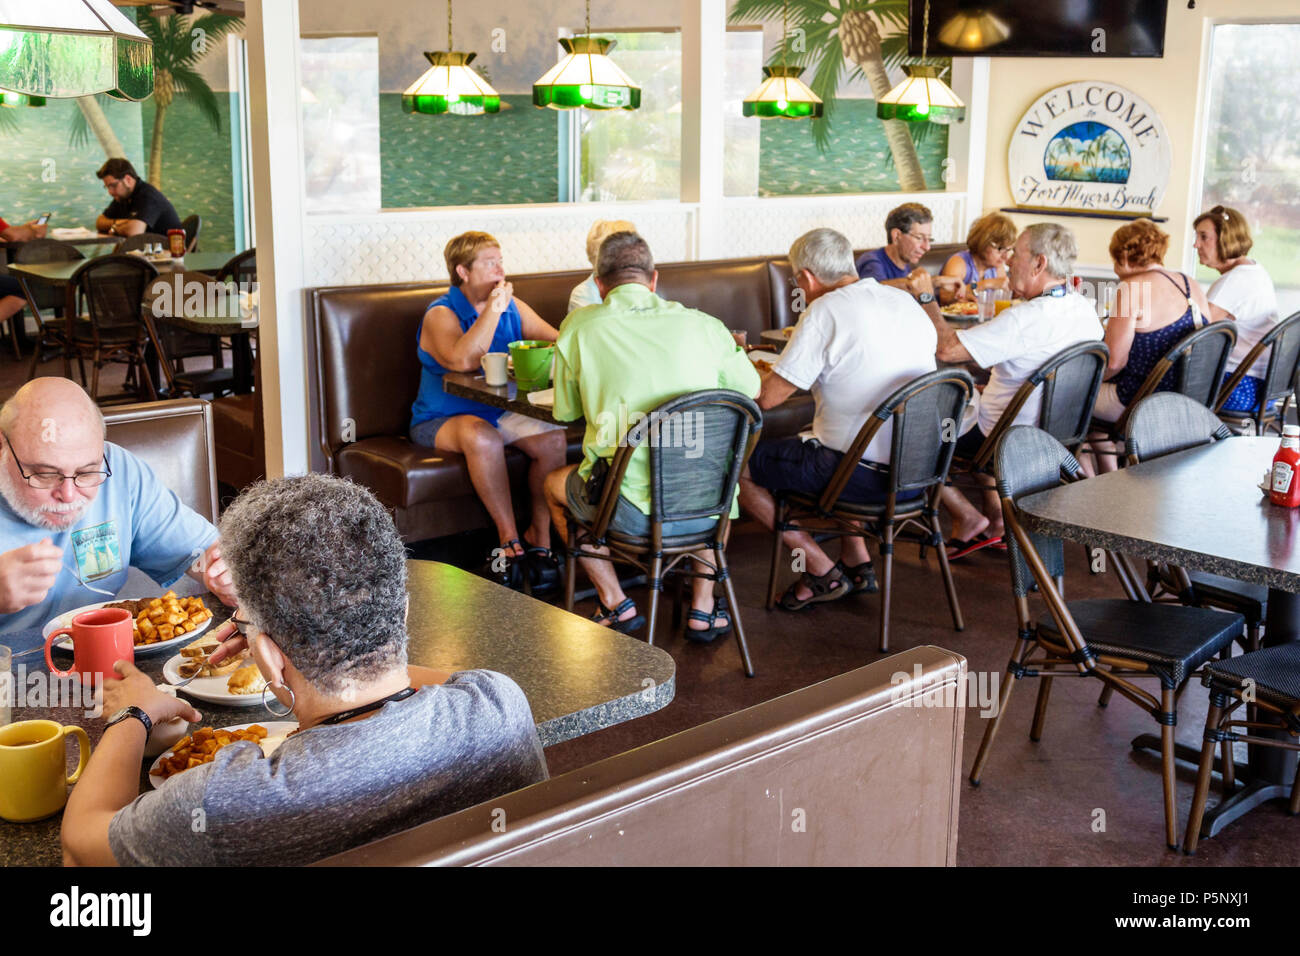 Florida,Fort Ft. Myers Beach,Truly Scrumptious Breakfast,restaurant restaurants food dining cafe cafes,interior inside,booth,man men male,woman female Stock Photo